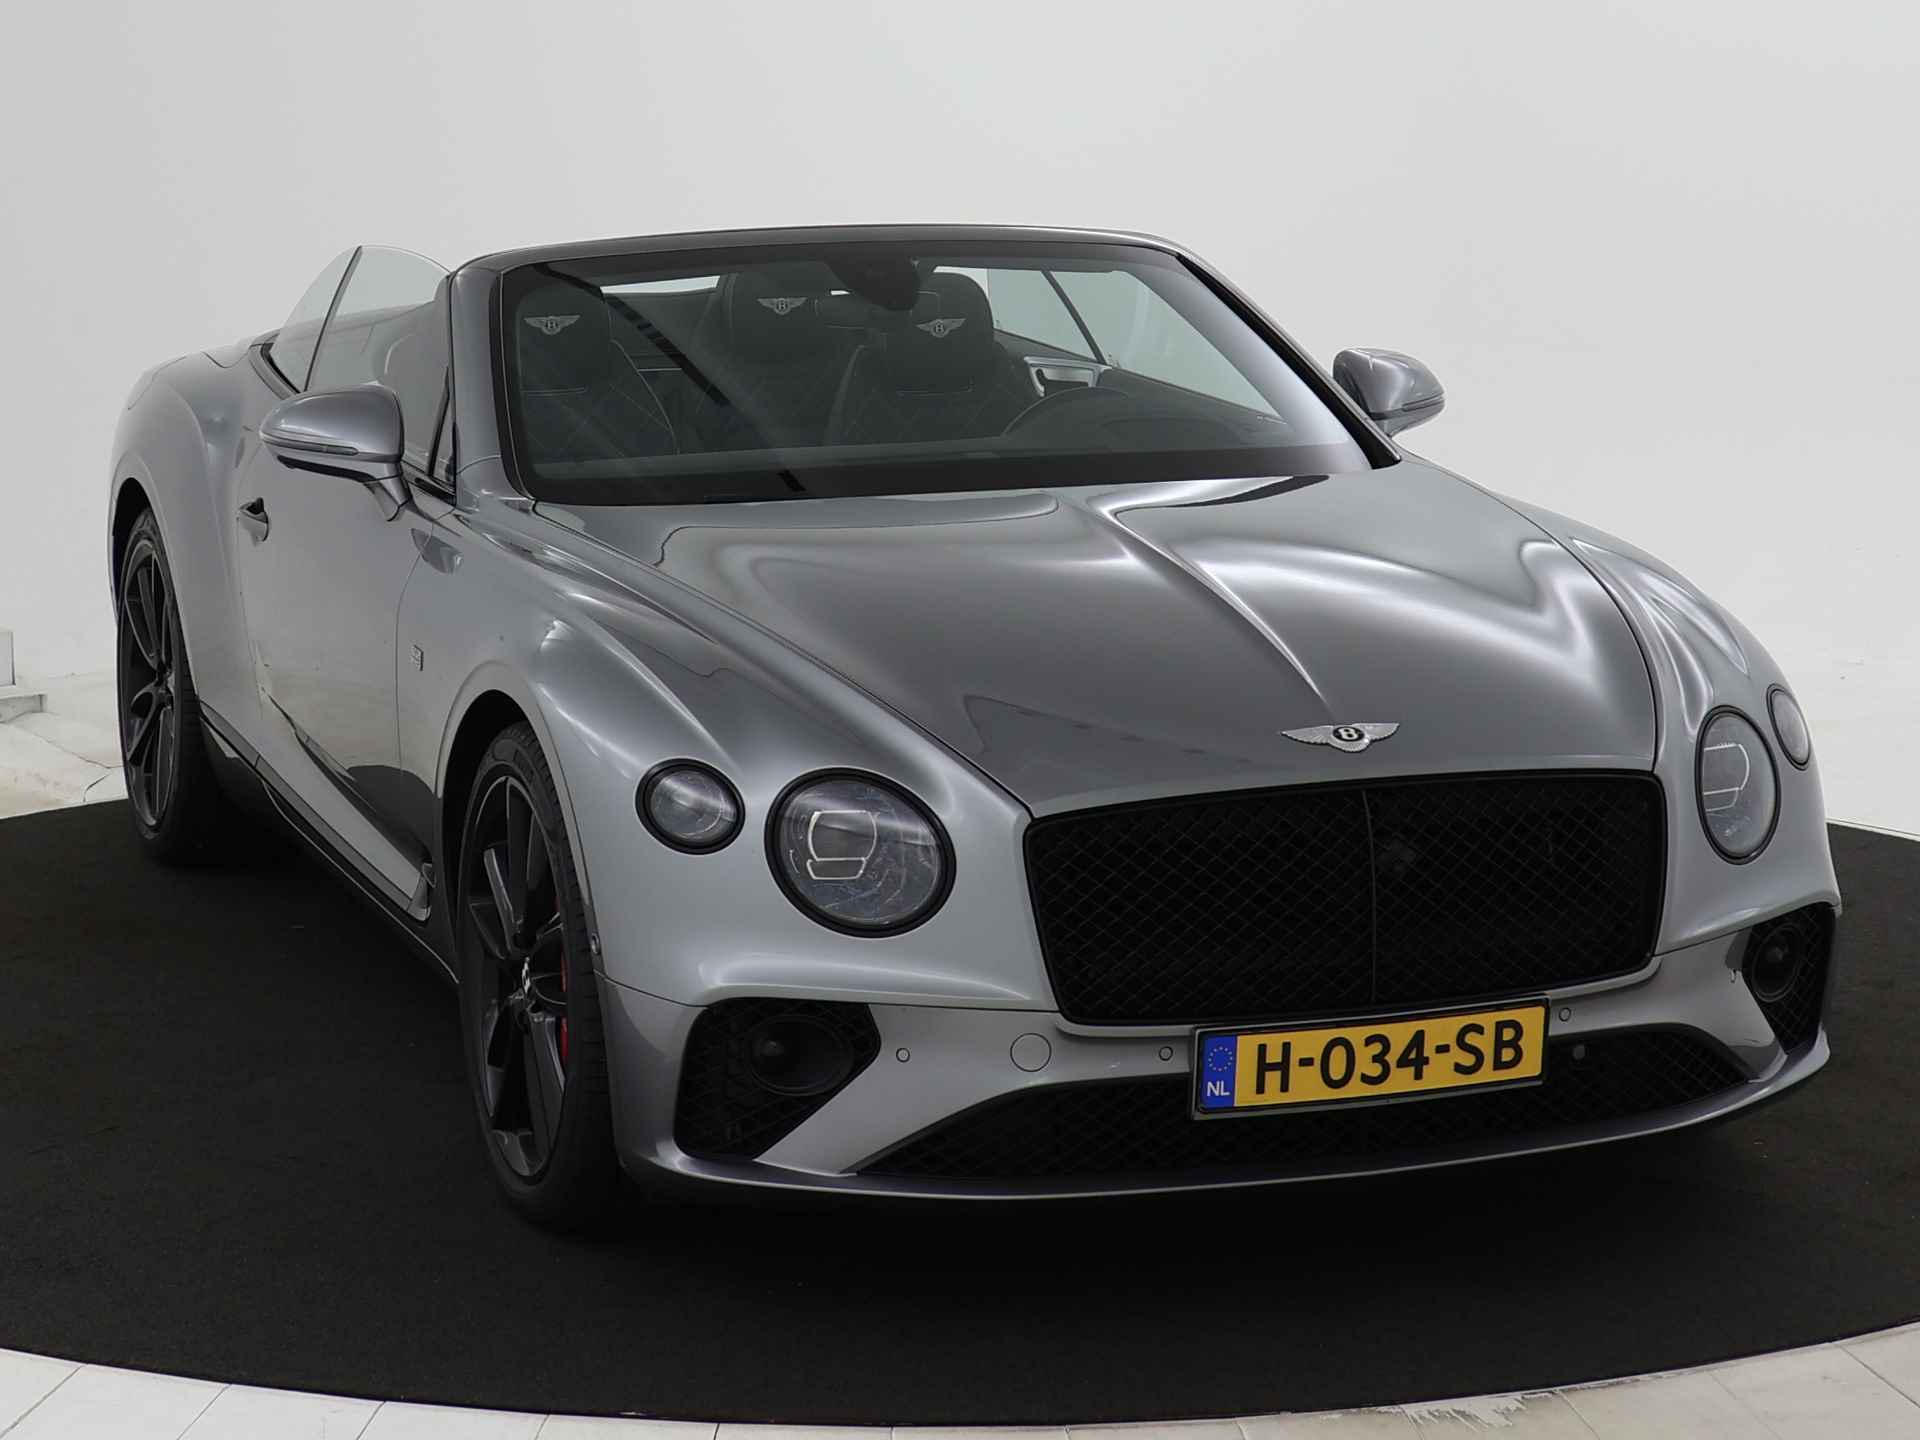 Bentley Continental GTC 6.0 W12 First Edition Mulliner - Bang & Olufsen - Black package - Massage seats - 23/46